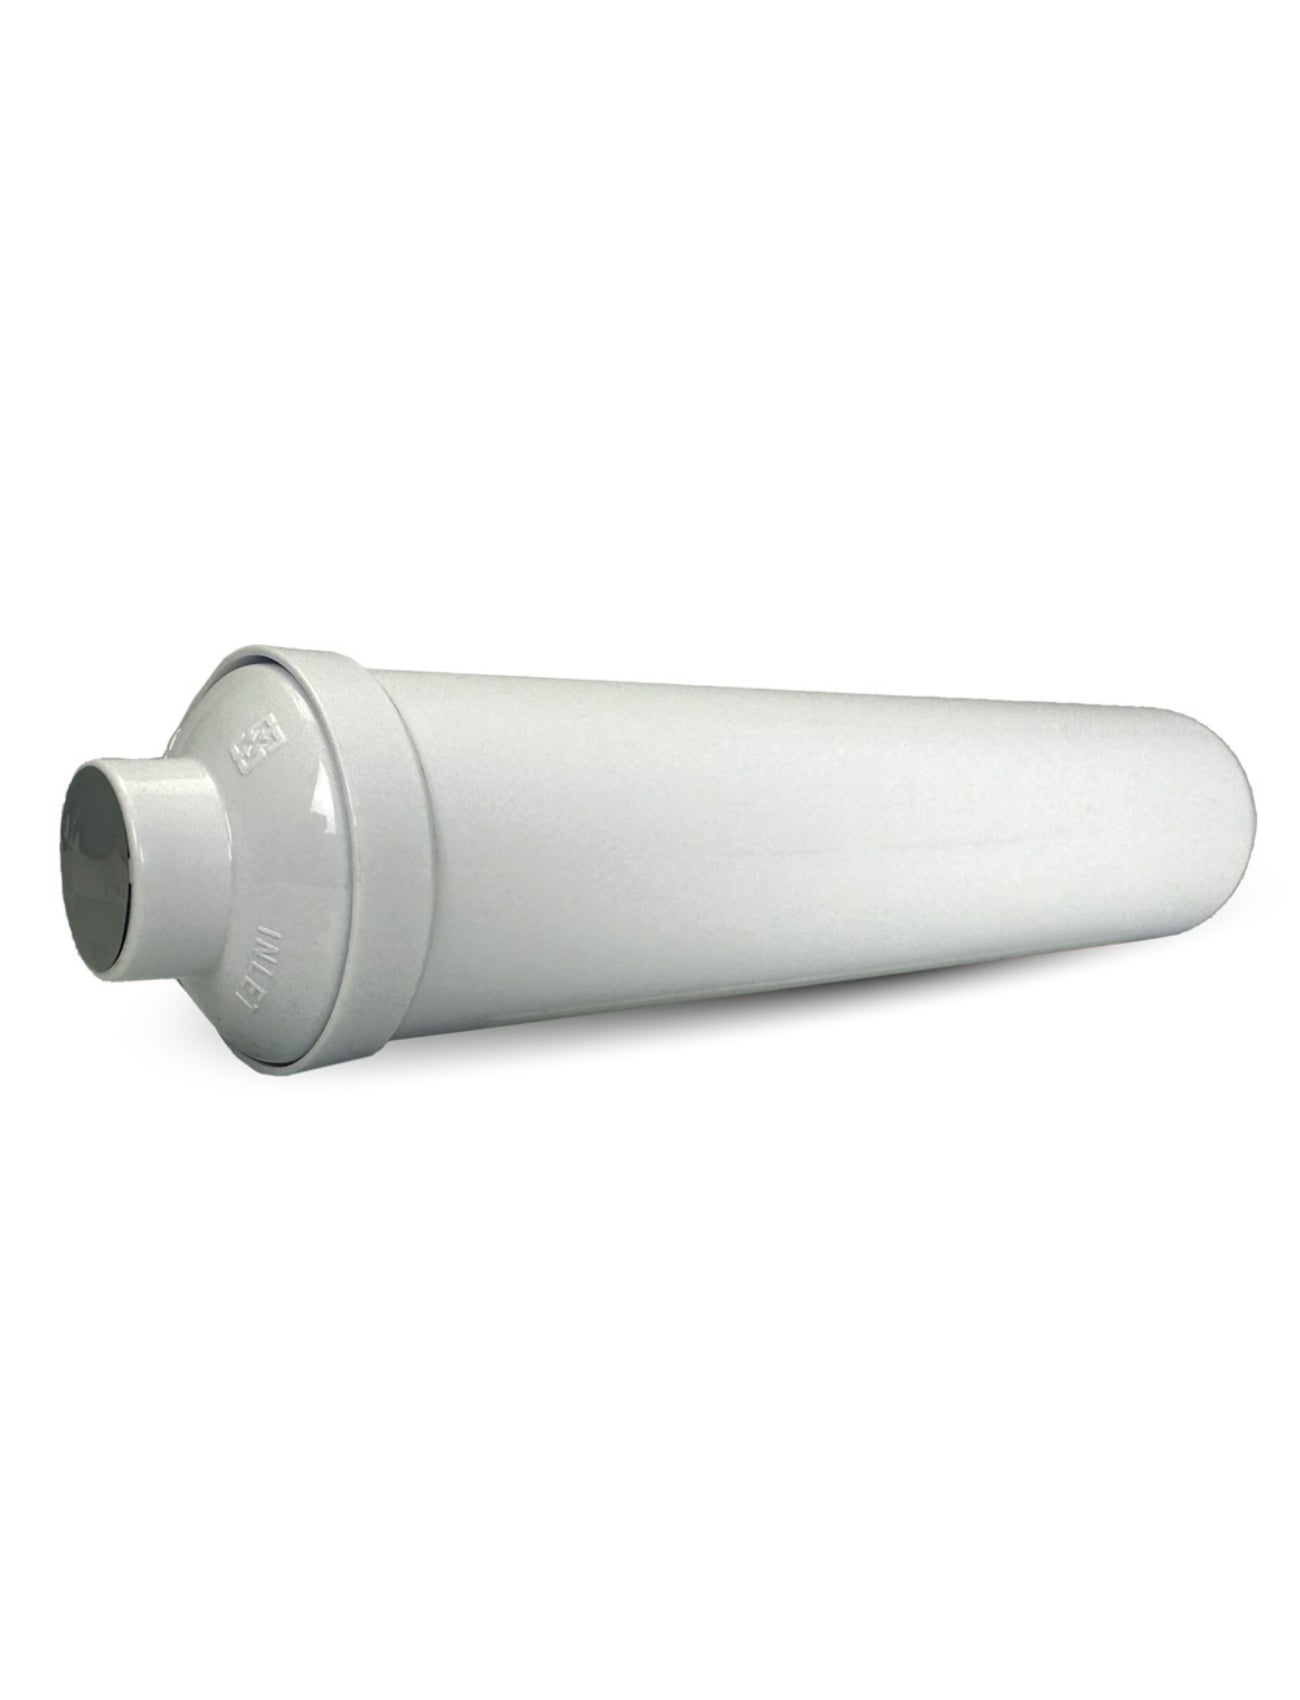 WATER FILTER NANO-SILVER INCL FITTINGS